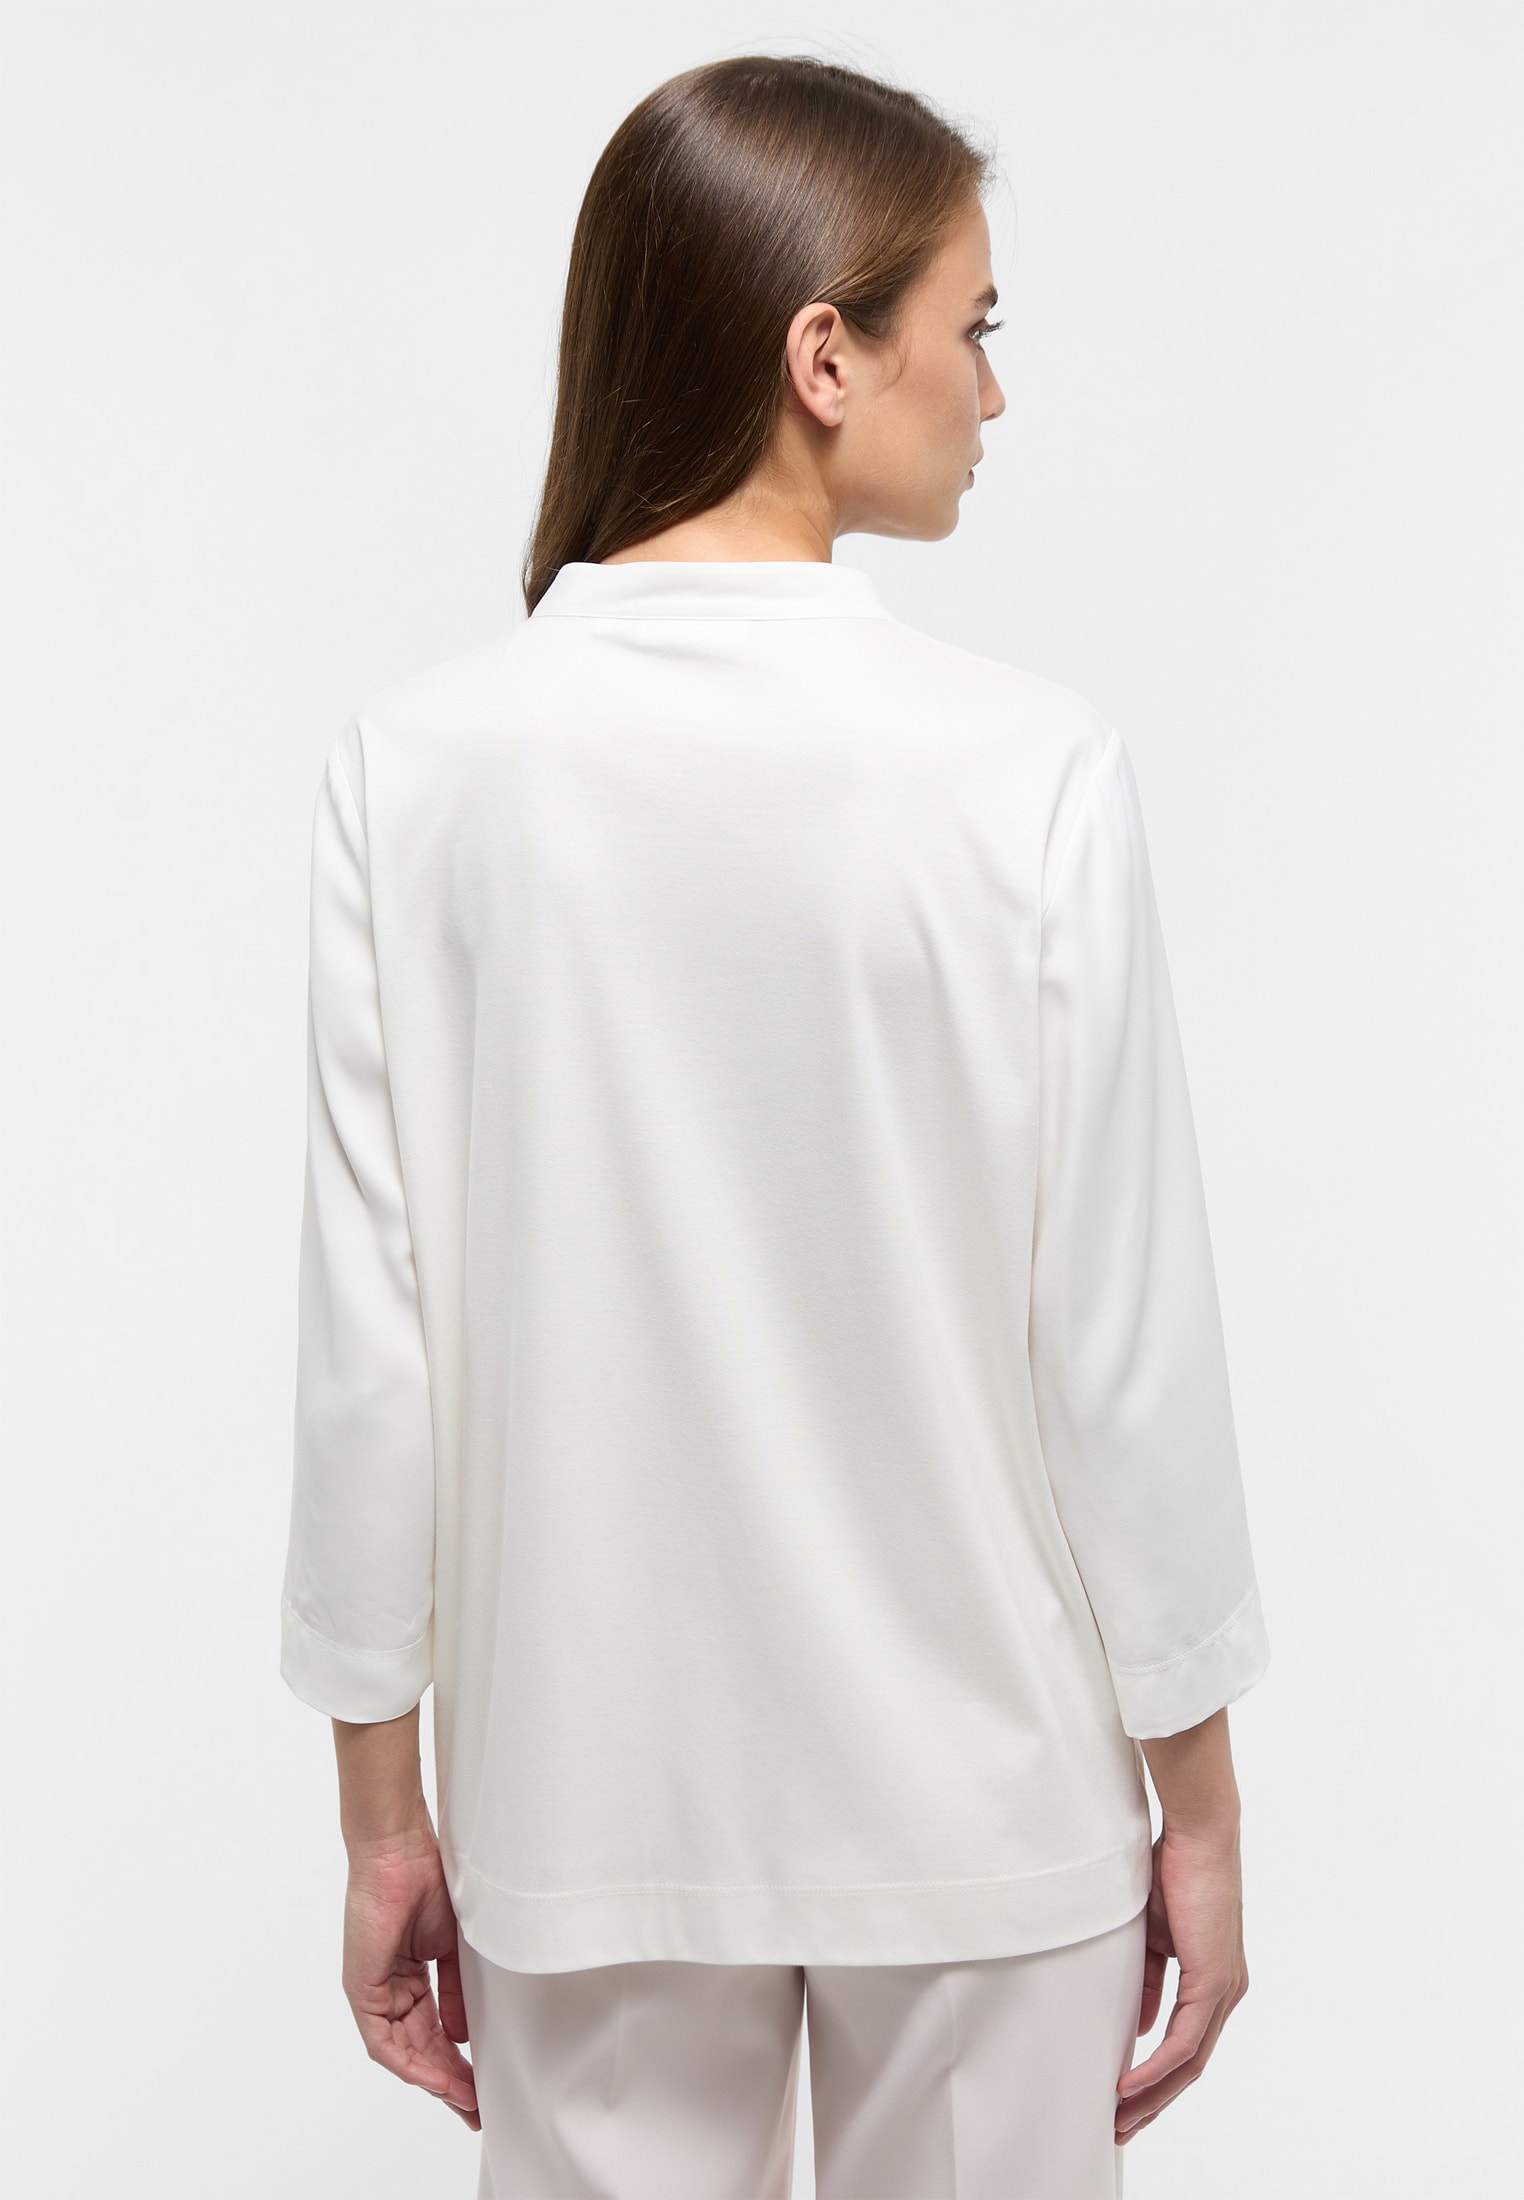 Viscose Shirt Bluse in off-white unifarben | off-white | 46 | 3/4-Arm |  2BL04358-00-02-46-3/4